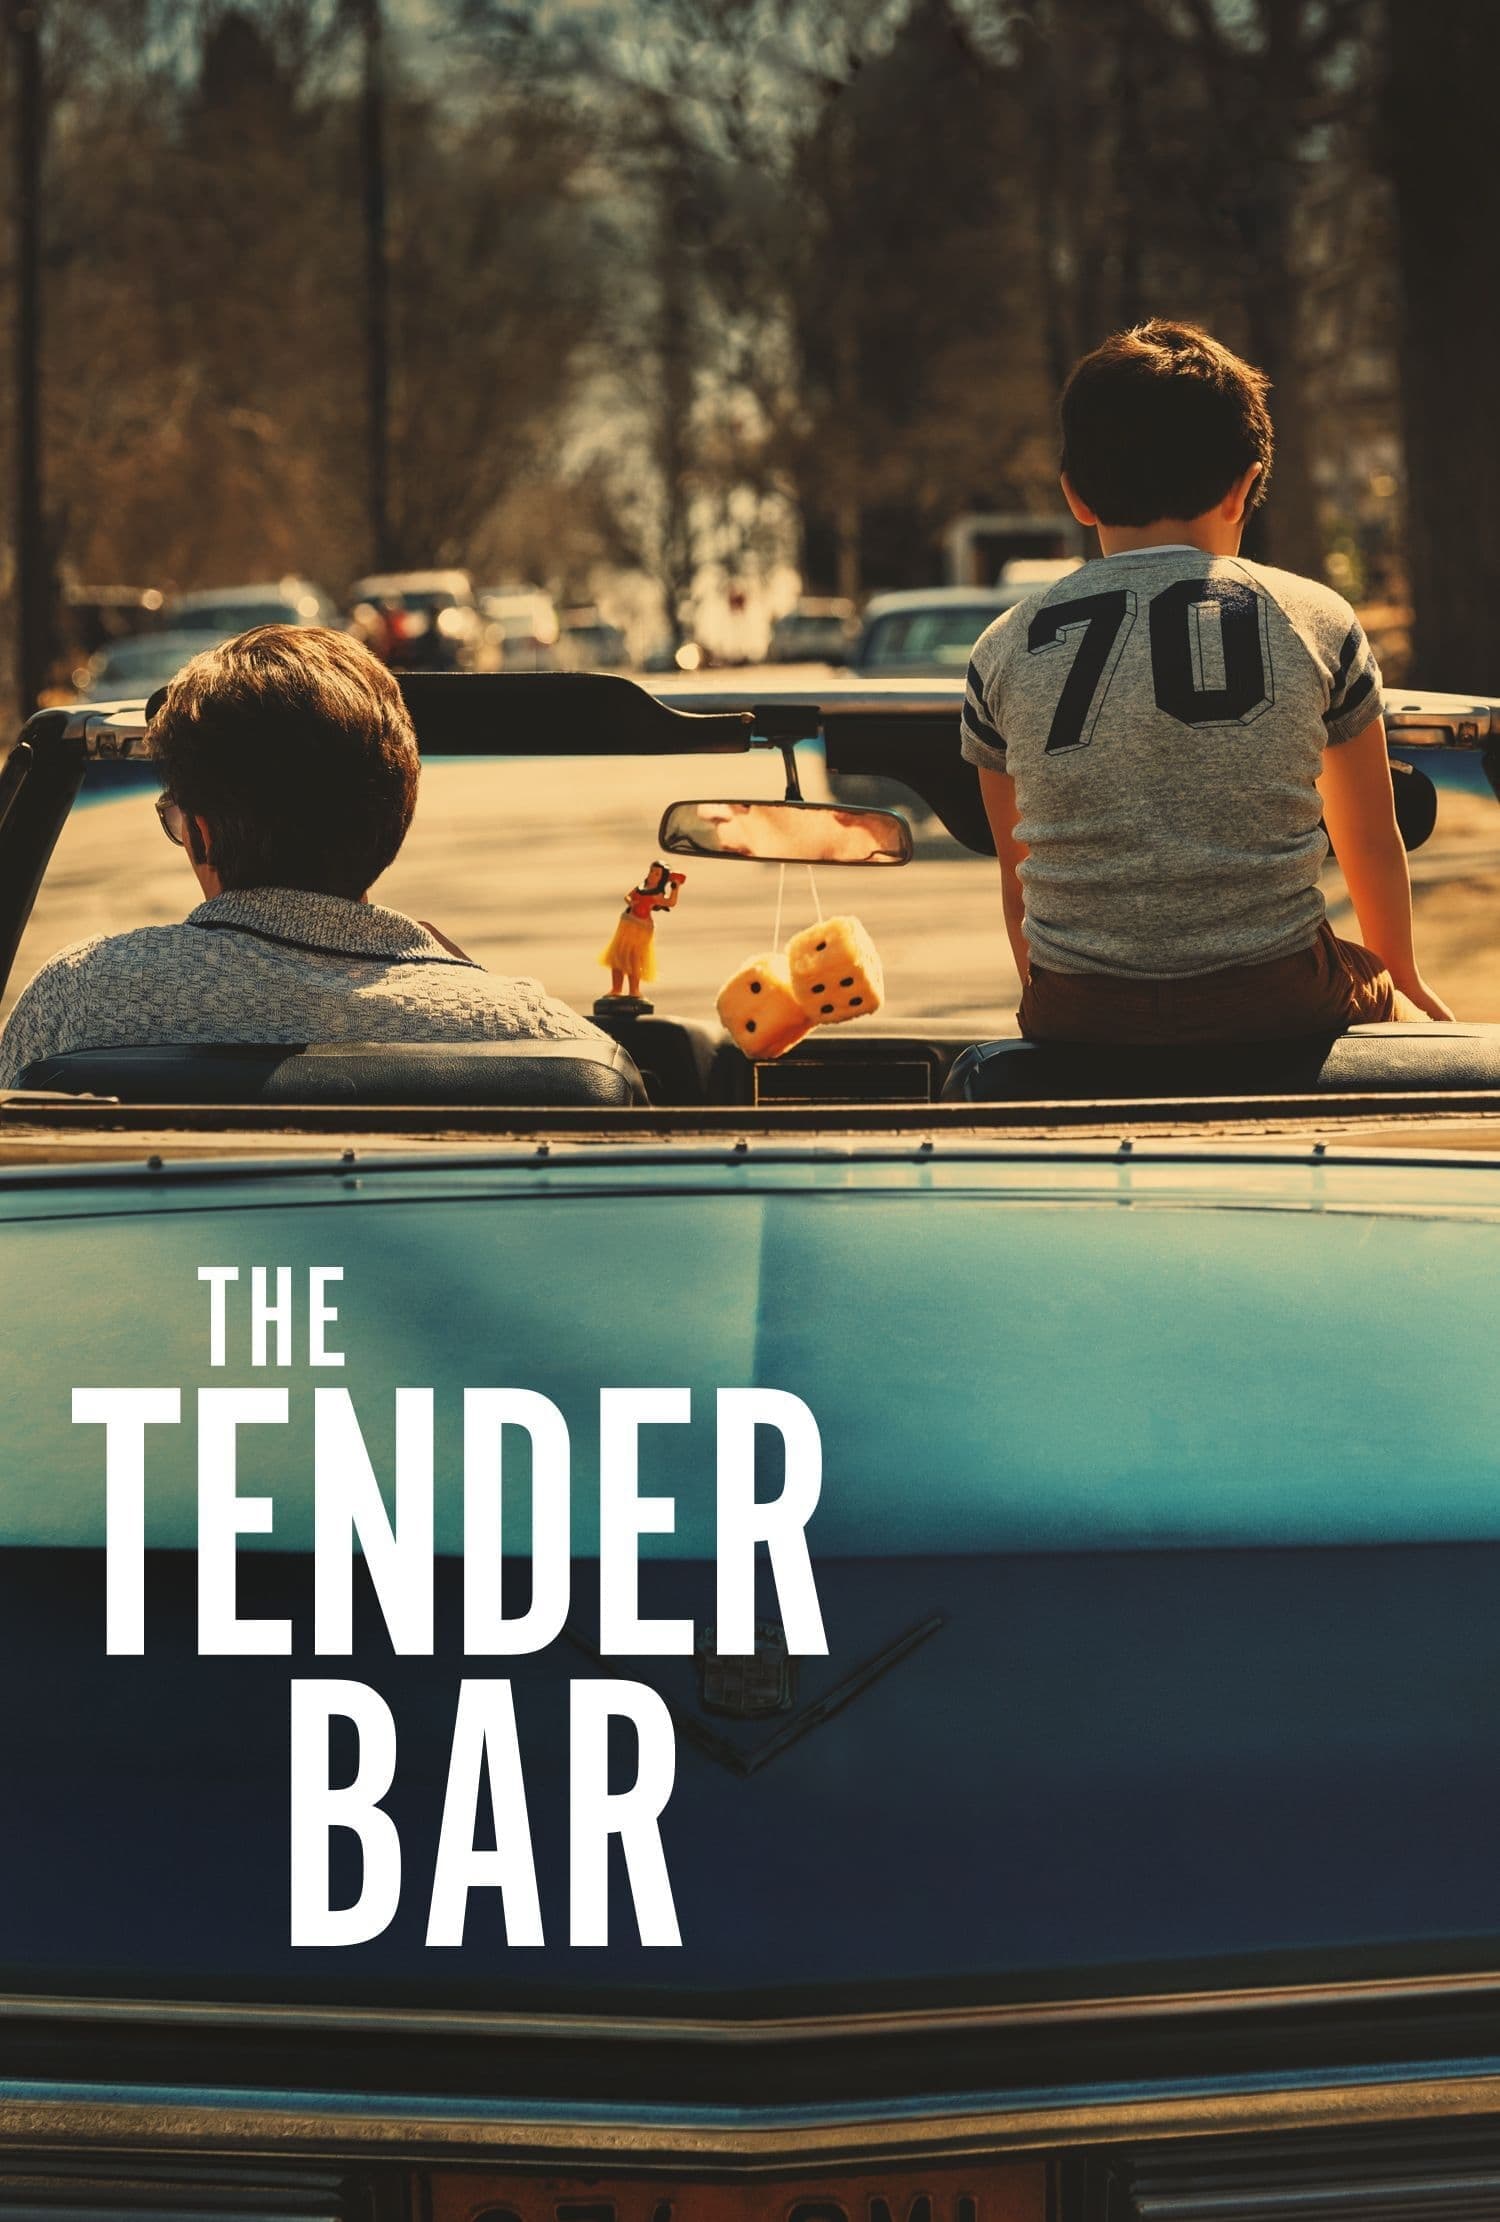 Poster for the movie "The Tender Bar"